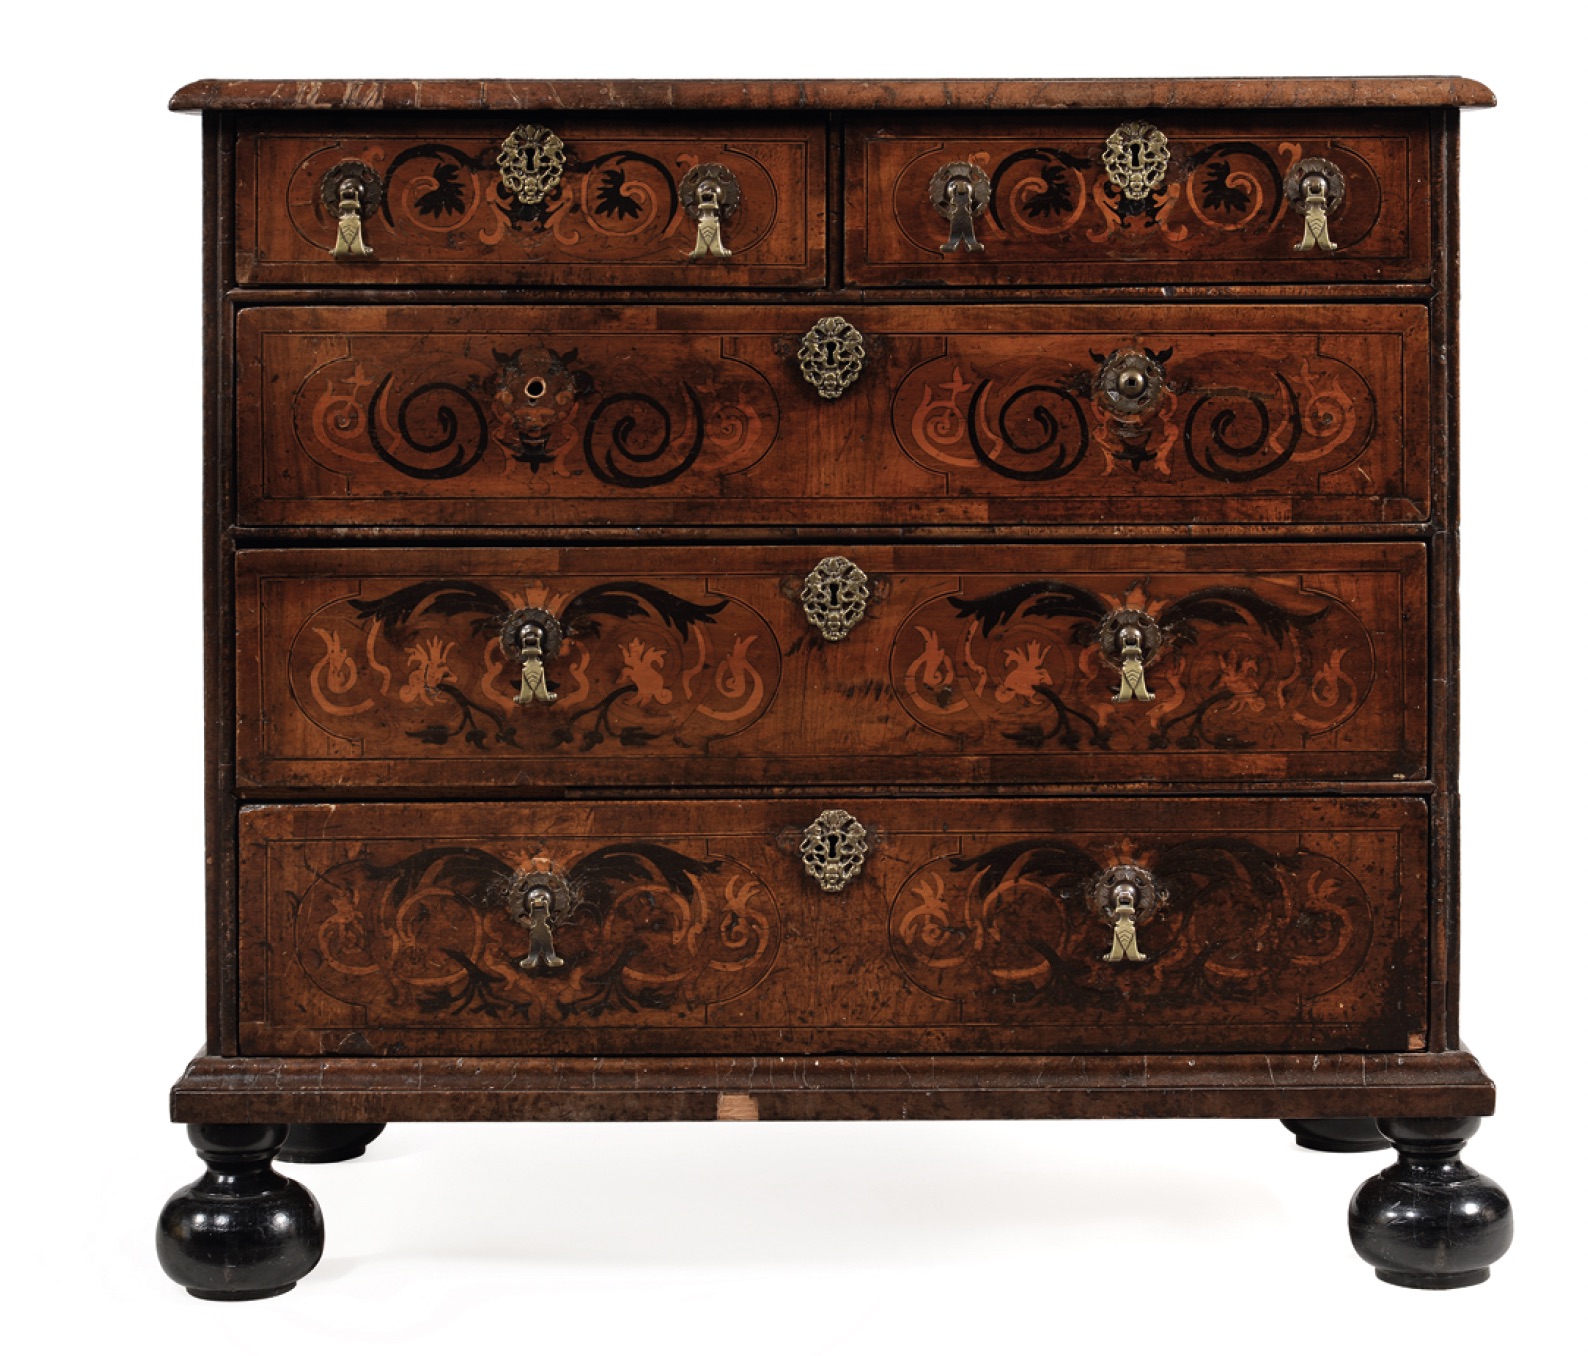 A William and Mary walnut and marquetry chest of drawers, c. 1690